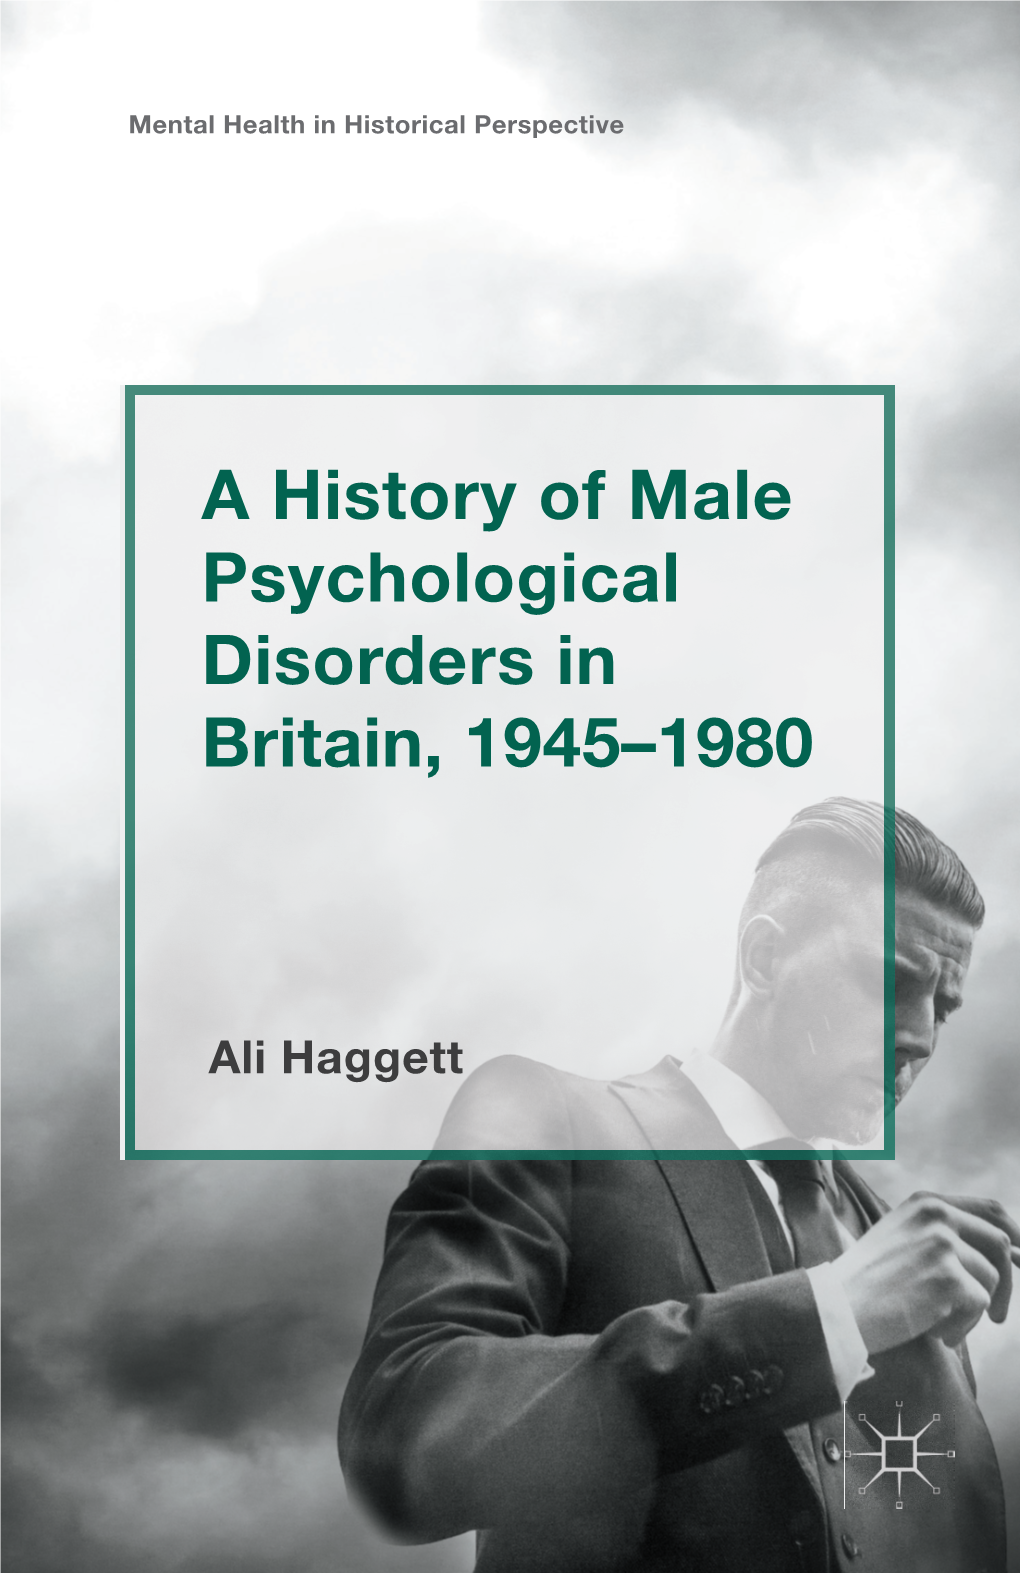 A History of Male Psychological Disorders in Britain, 1945–1980